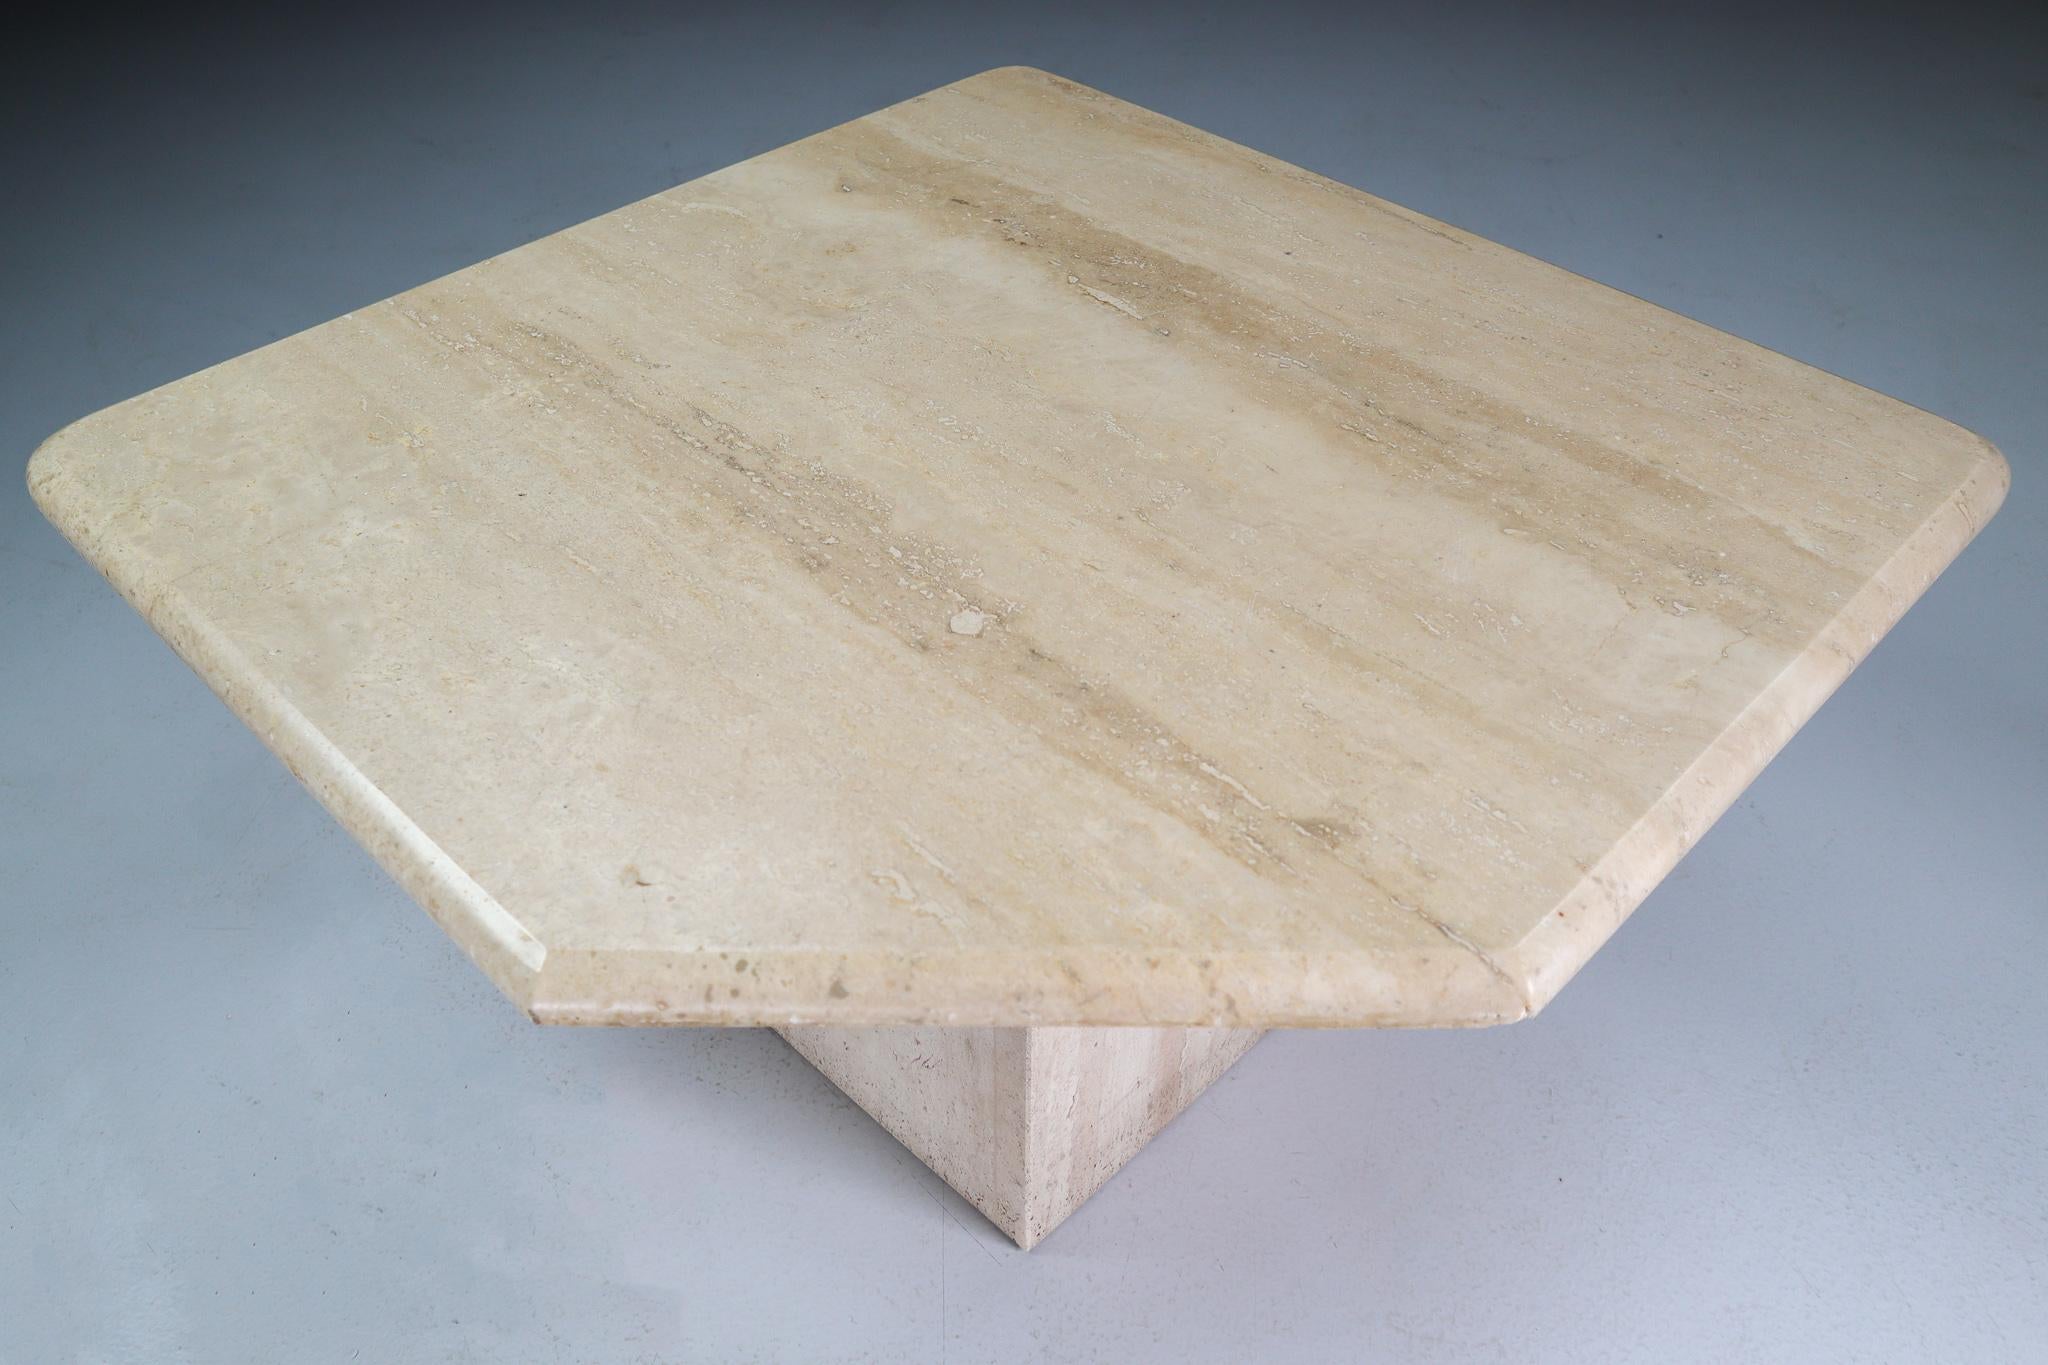 Modern Roche Bobois Style Travertine Side or End Table, Italy 1970s

This beautiful post-modern travertine side coffee table, circa the 1970s, has beautiful graining and a pentagonal top. This sculptural travertine side table would work great in a